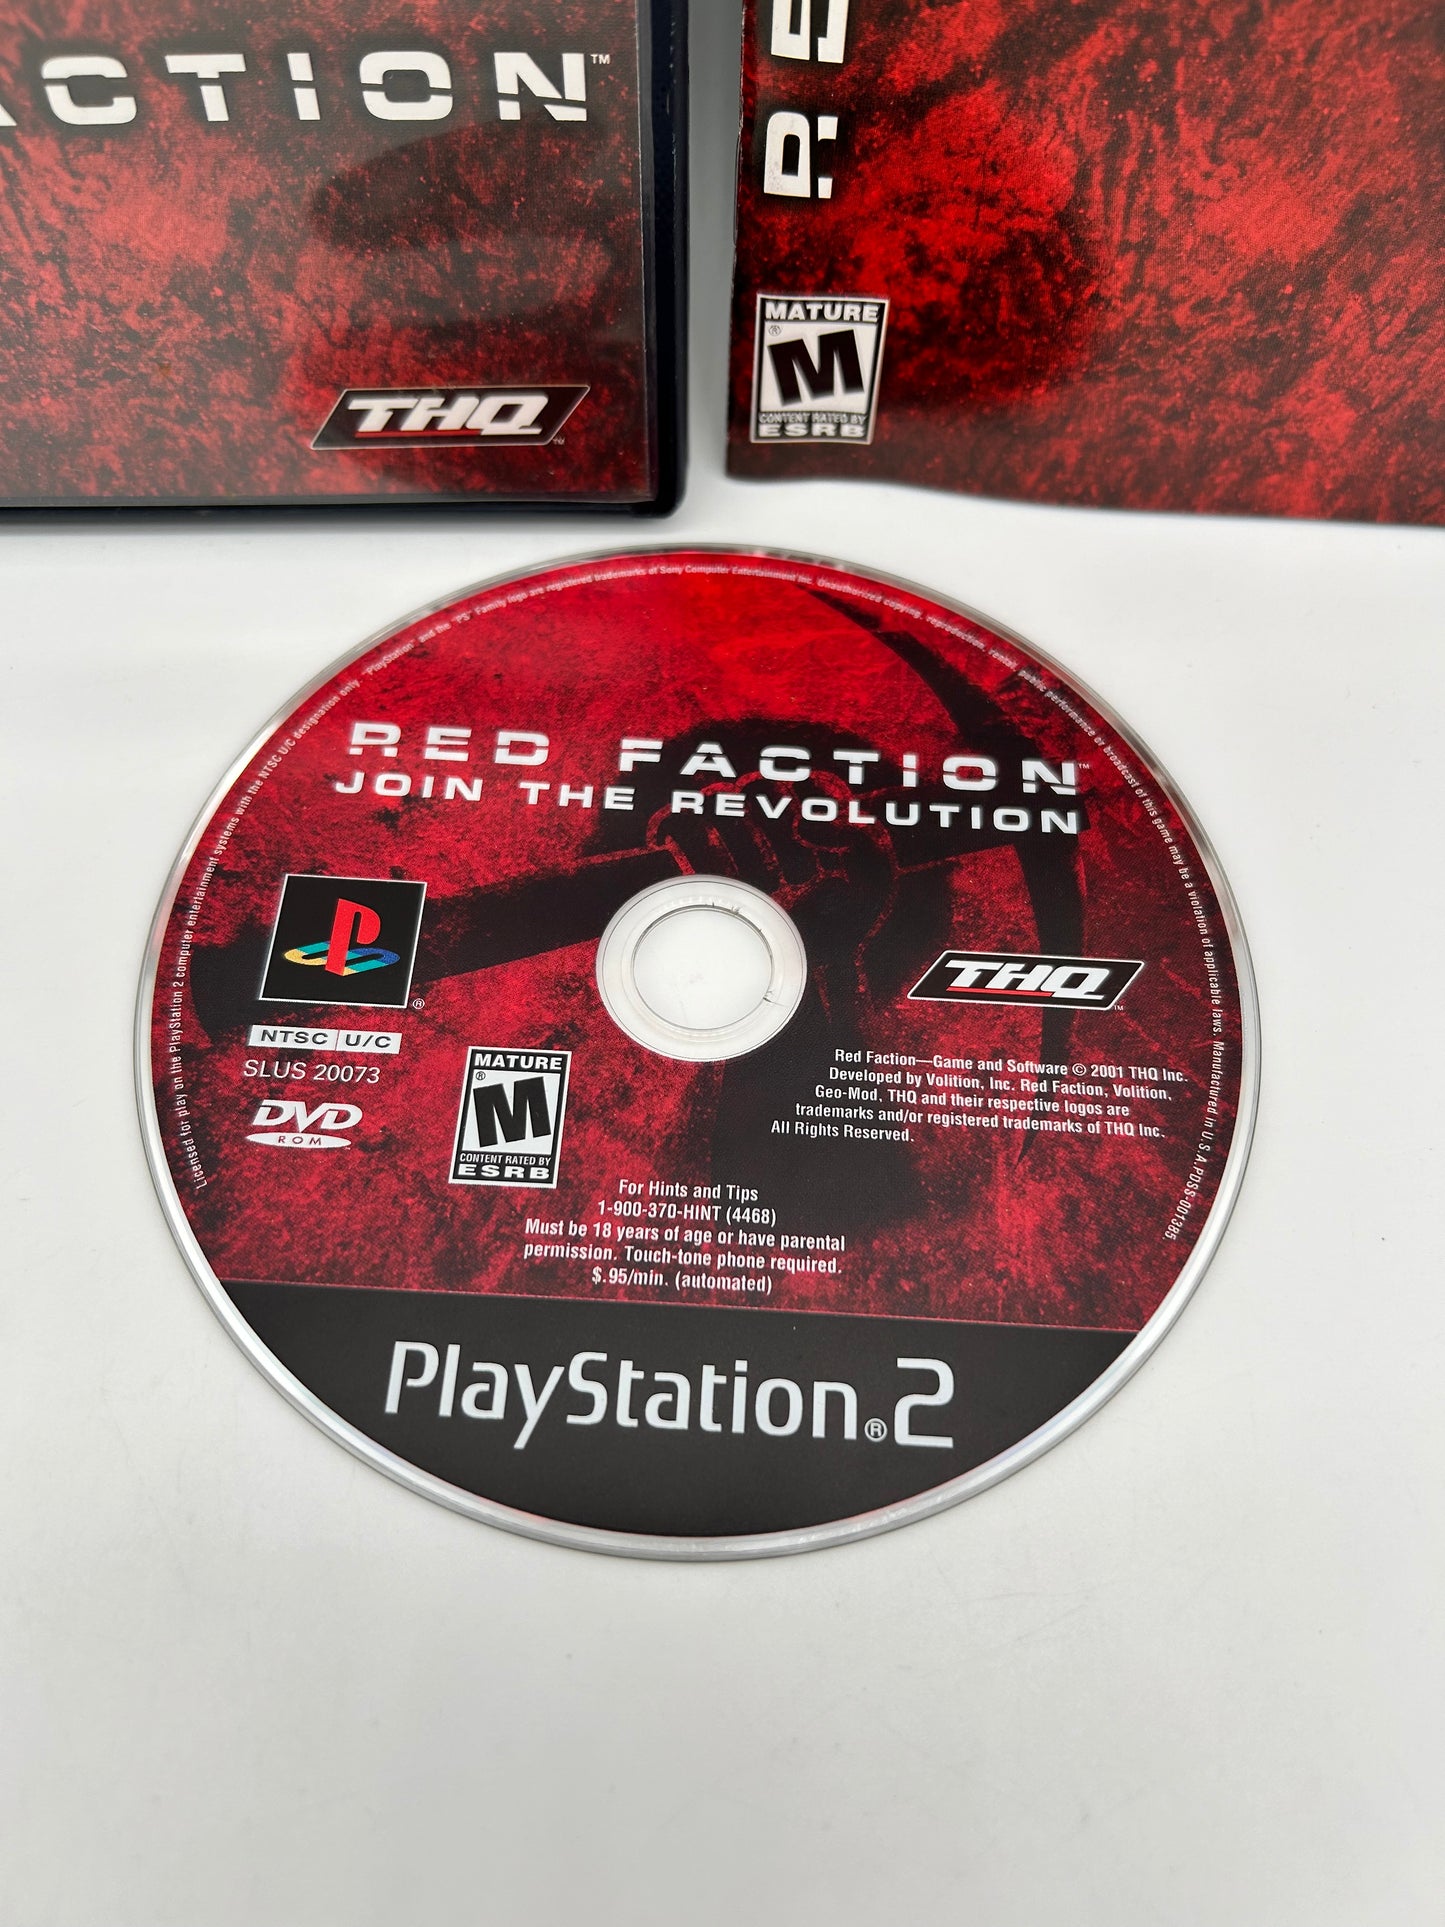 SONY PLAYSTATiON 2 [PS2] | RED FACTiON